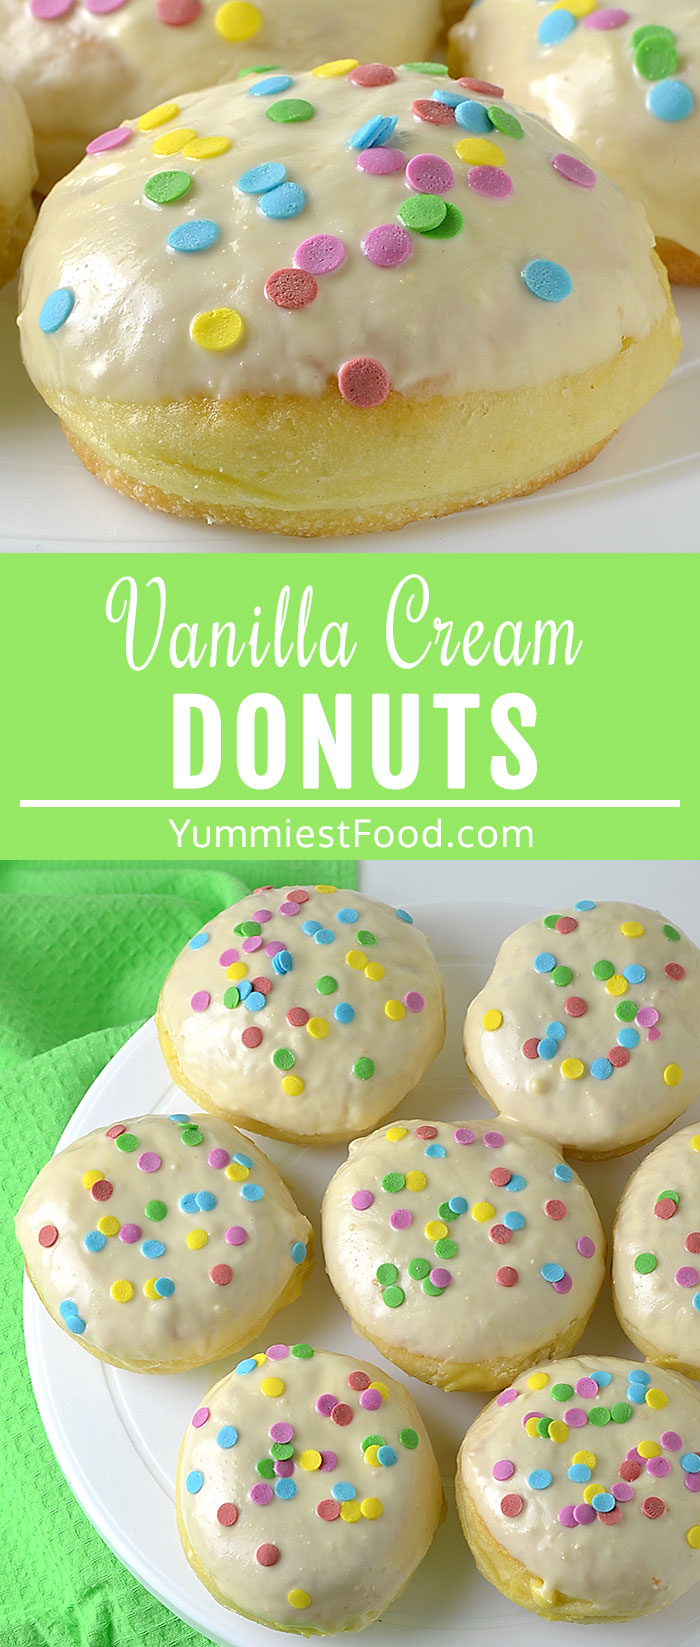 Vanilla Cream Donuts are super soft baked donuts adorned with white chocolate glaze and filled with easy Vanilla cream! Baked donuts are insanely delicious and make such a special treat! Everyone will love decorating the glazed donuts to look like Easter treat! #desserts #dessertrecipes #easyrecipes #easter #donuts